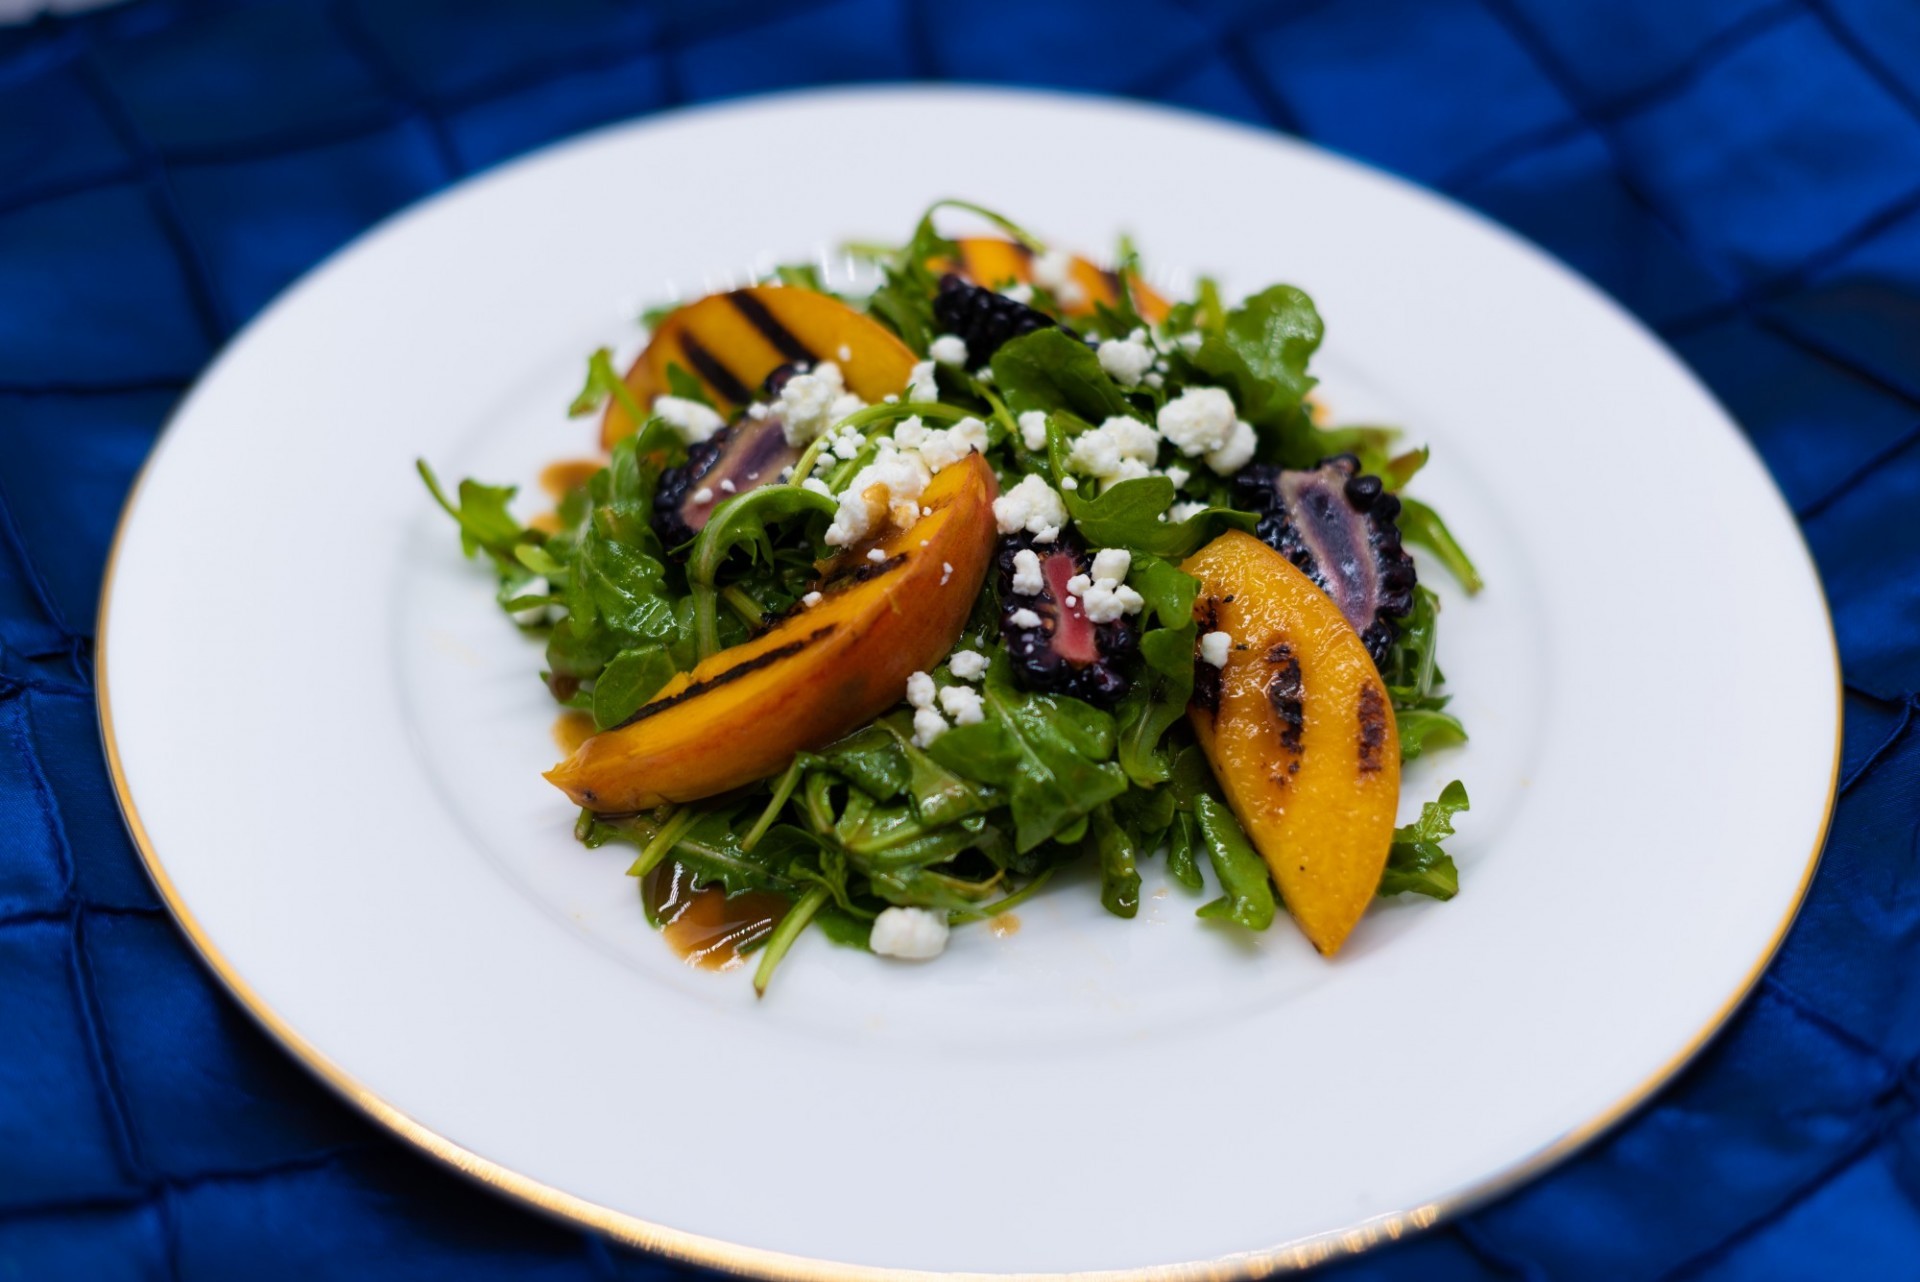 Grilled Peaches & Arugula Salad with Blackberries, Crumbled Goat Cheese, Balsamic Vinegar Dressing